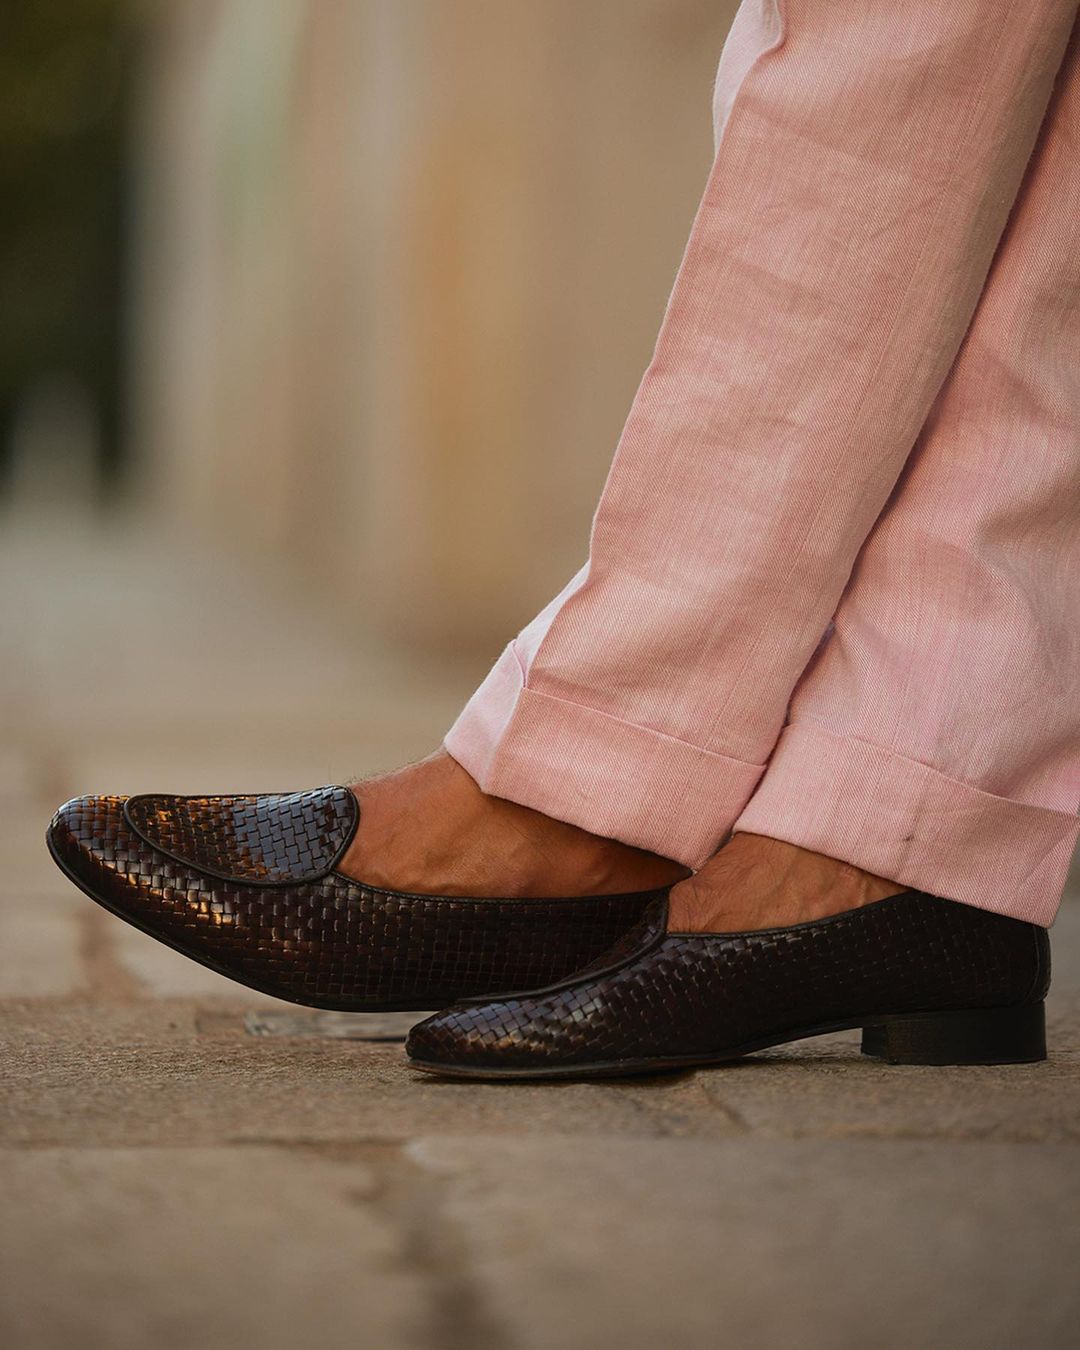 Bottom pant view of custom linen Gurkha pants for men by Luxire in pink twill